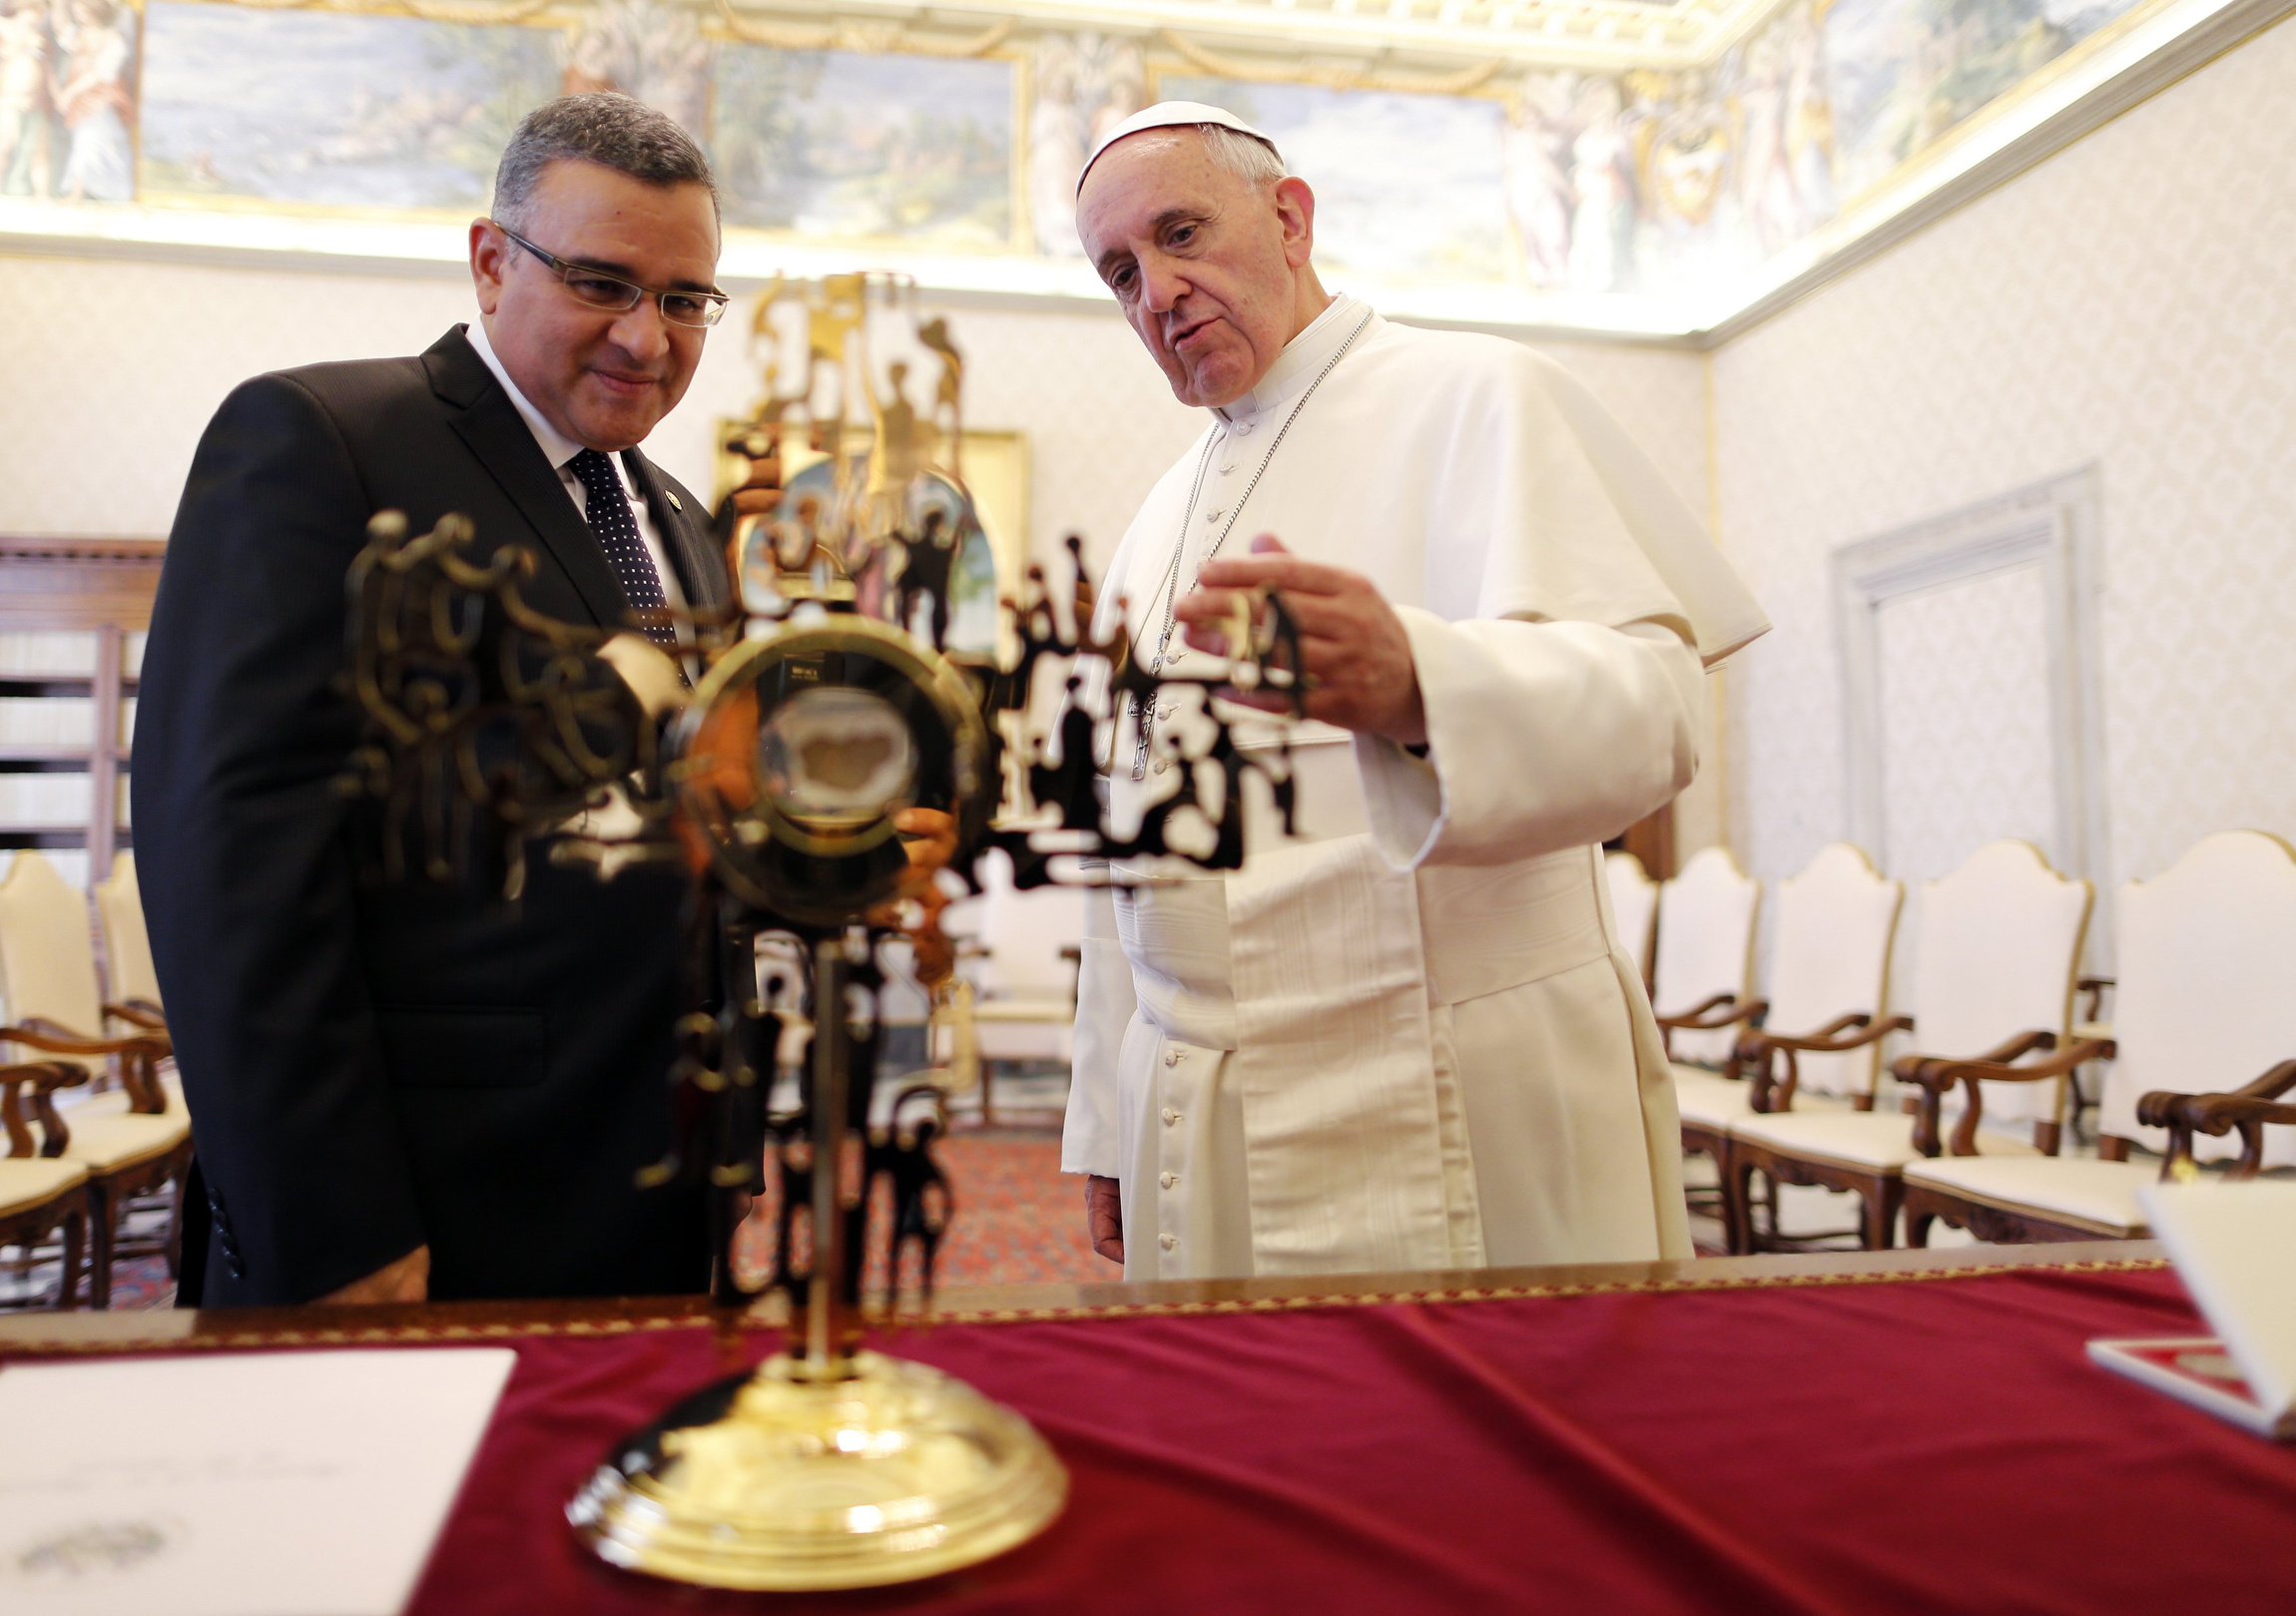 Pope Francis and President Mauricio Funes Cartagena of El Salvador look at a reliquary containing a blood-stained piece of the vestment of slain Archbishop Oscar Romero during a private audience in the Apostolic Palace at the Vatican May 23. (CNS photo/Alessandro Bianchi, Reuters)